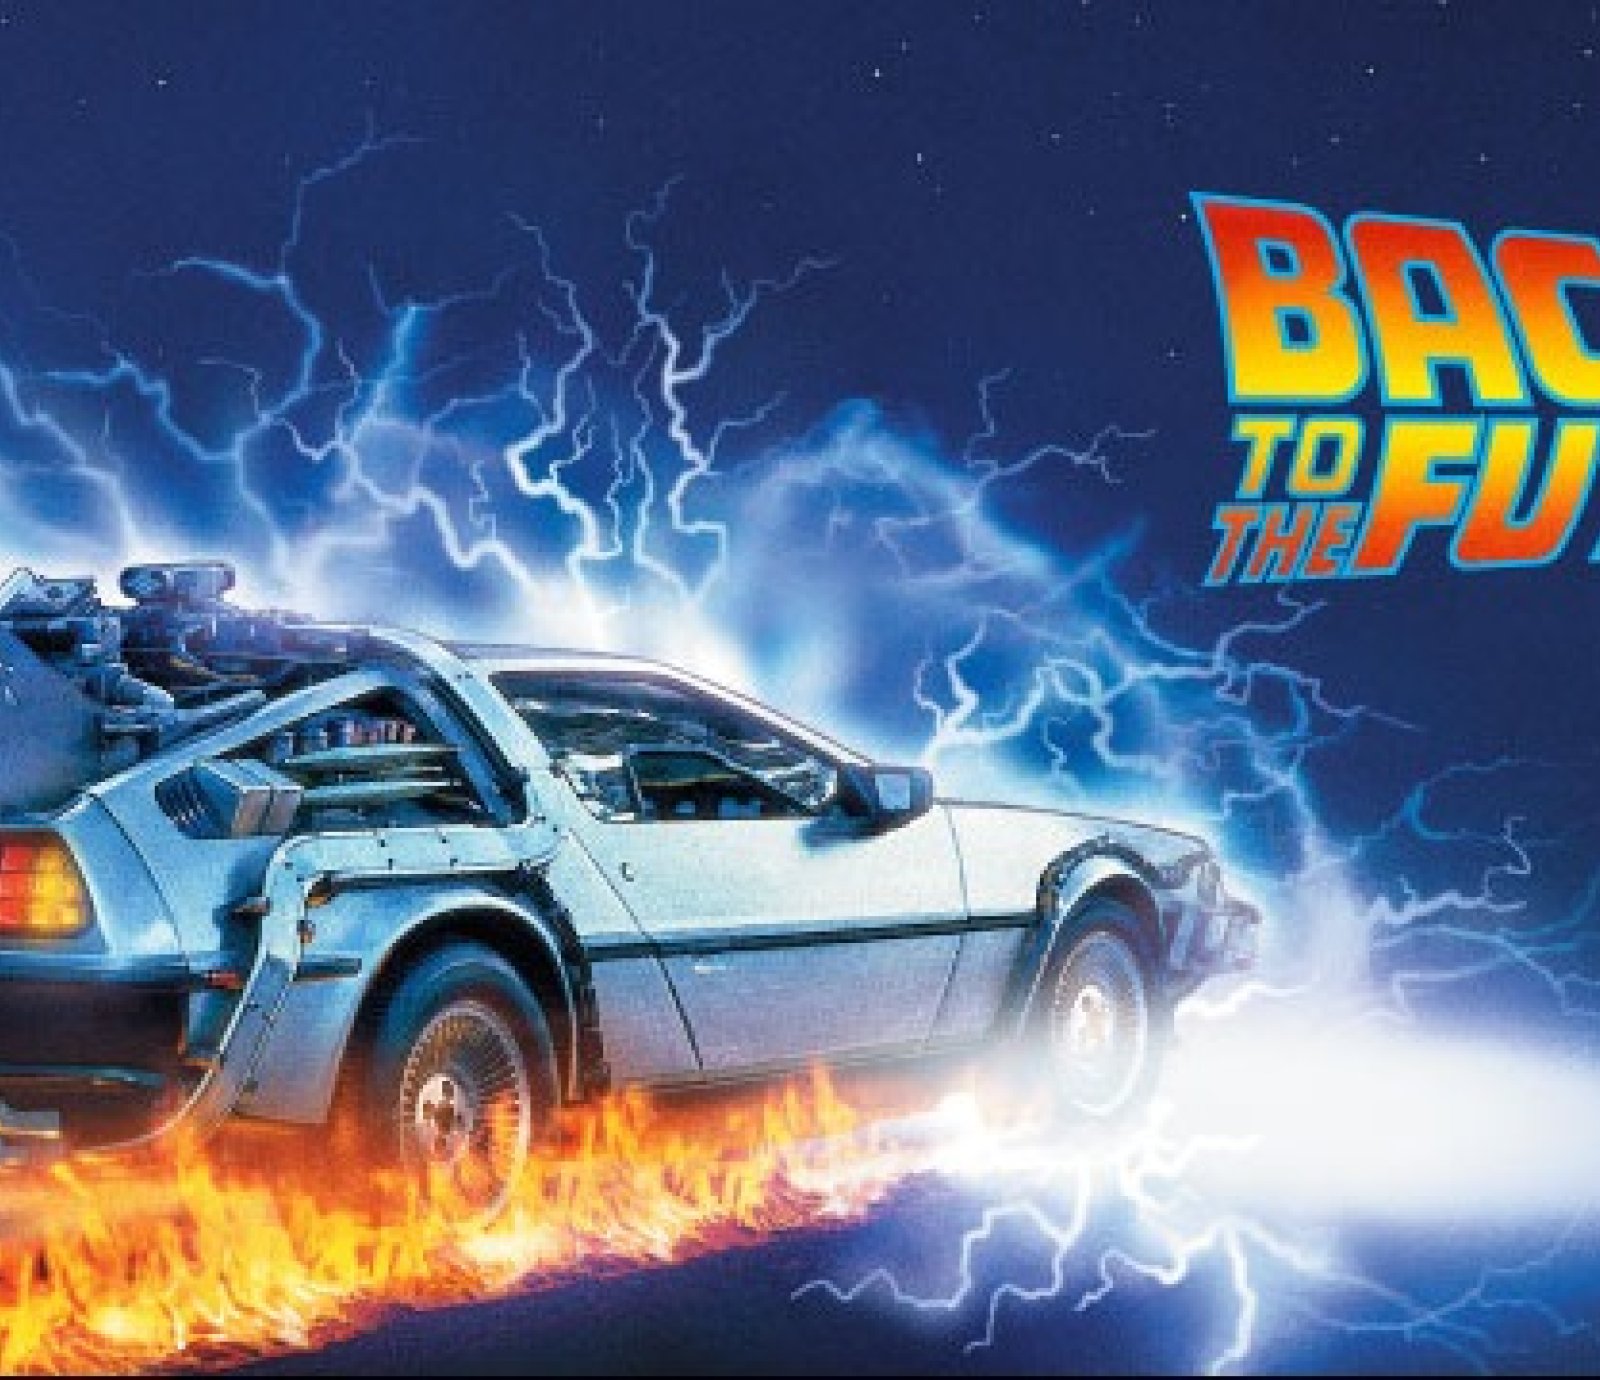 Back to the Future - The Musical (UK)